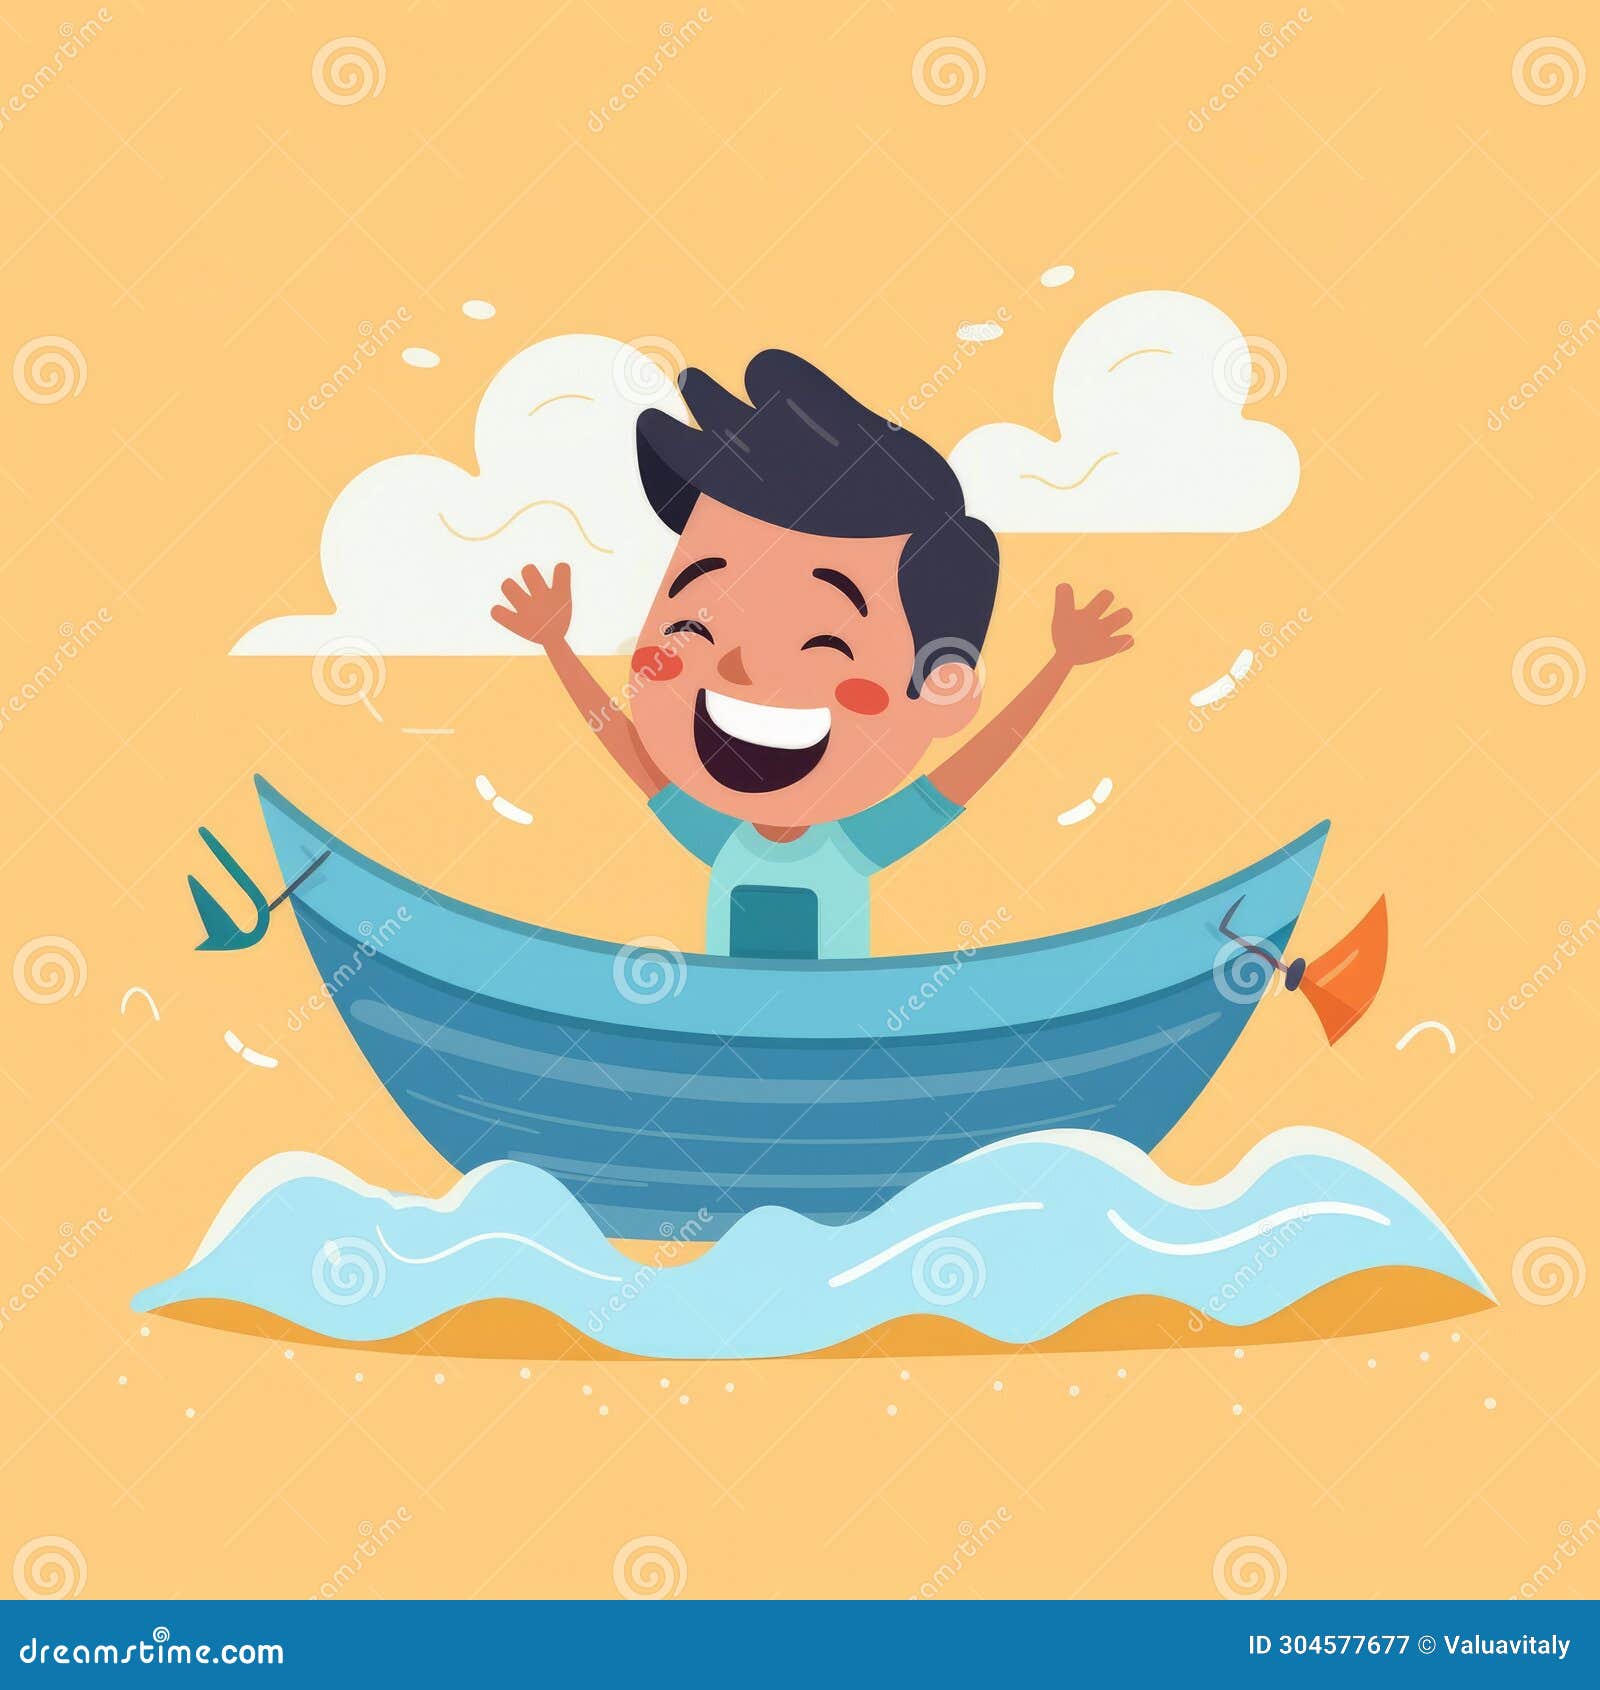 Illustration of a Happy Boy Sitting in a Boat. Simple Vector Art